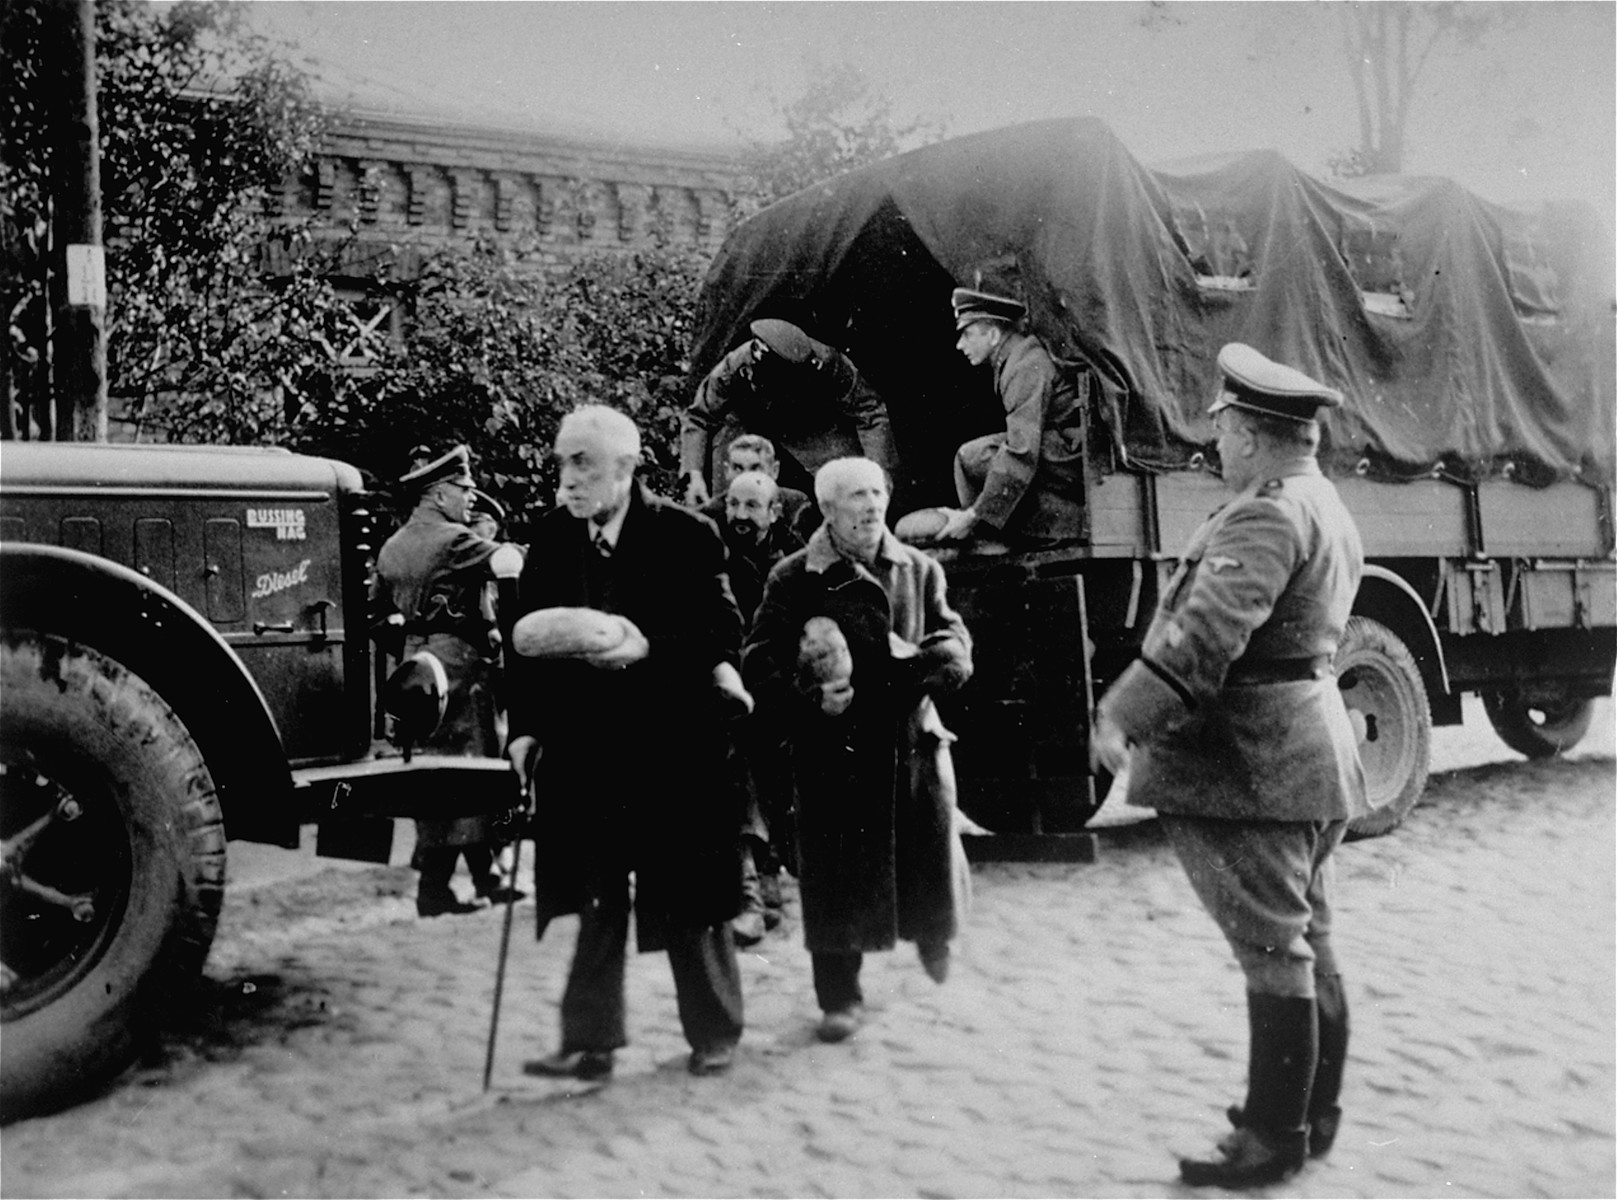 Jewish men from Plonsk receive loaves of bread that Germans distribute from the back of a truck.